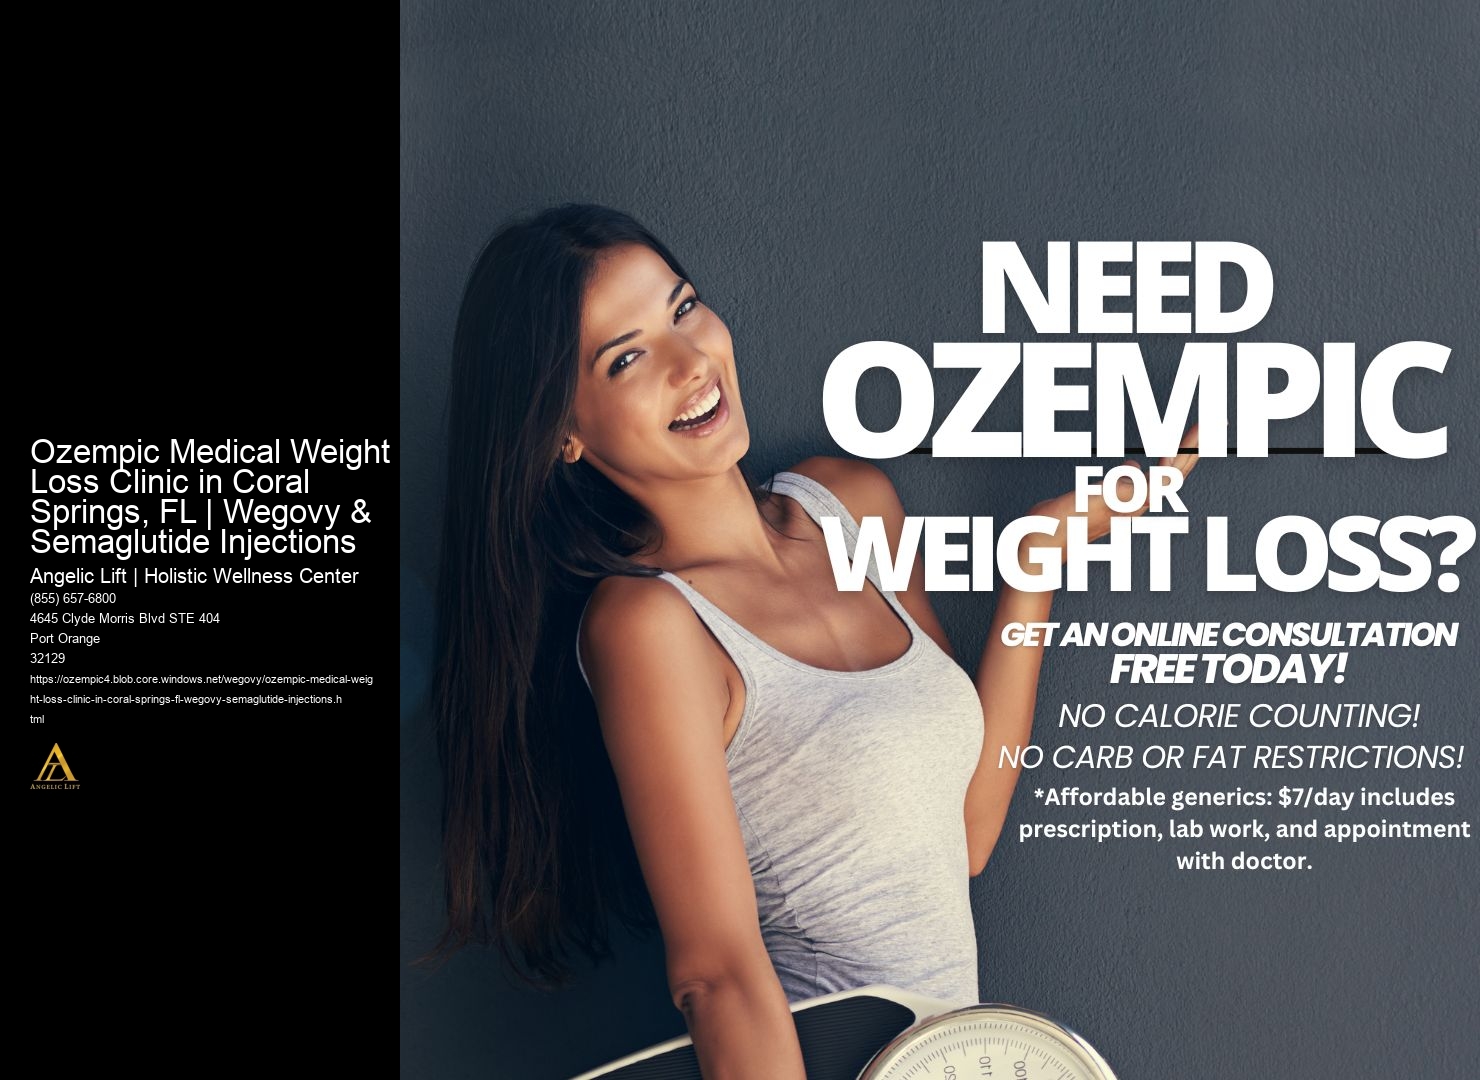 Ozempic Medical Weight Loss Clinic in Coral Springs, FL | Wegovy & Semaglutide Injections